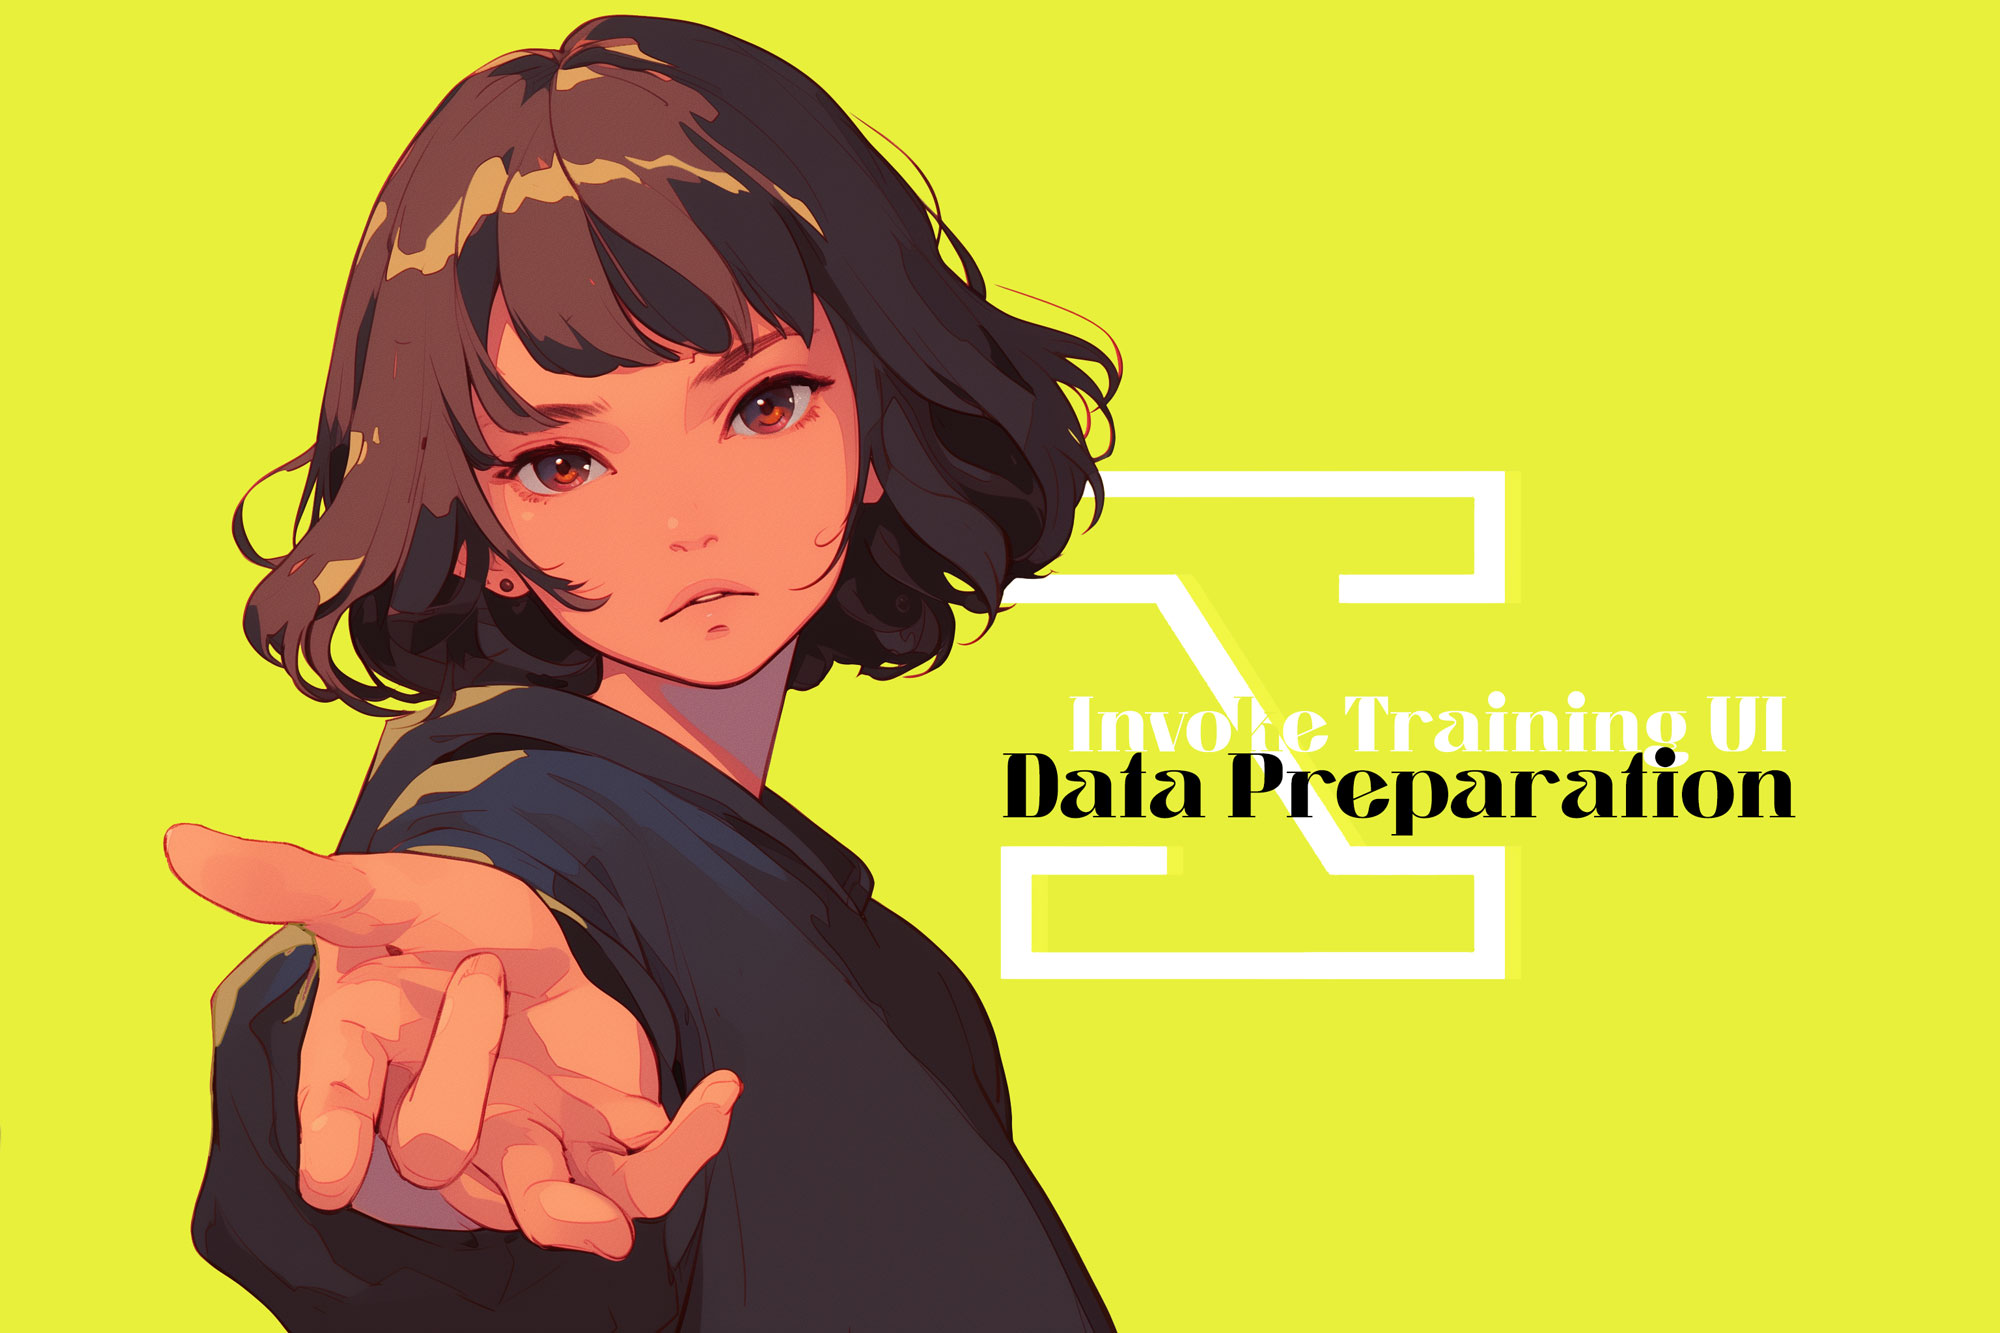 anime girl with short hair reaching out to help - Preparing Datasets with Invoke Training UI